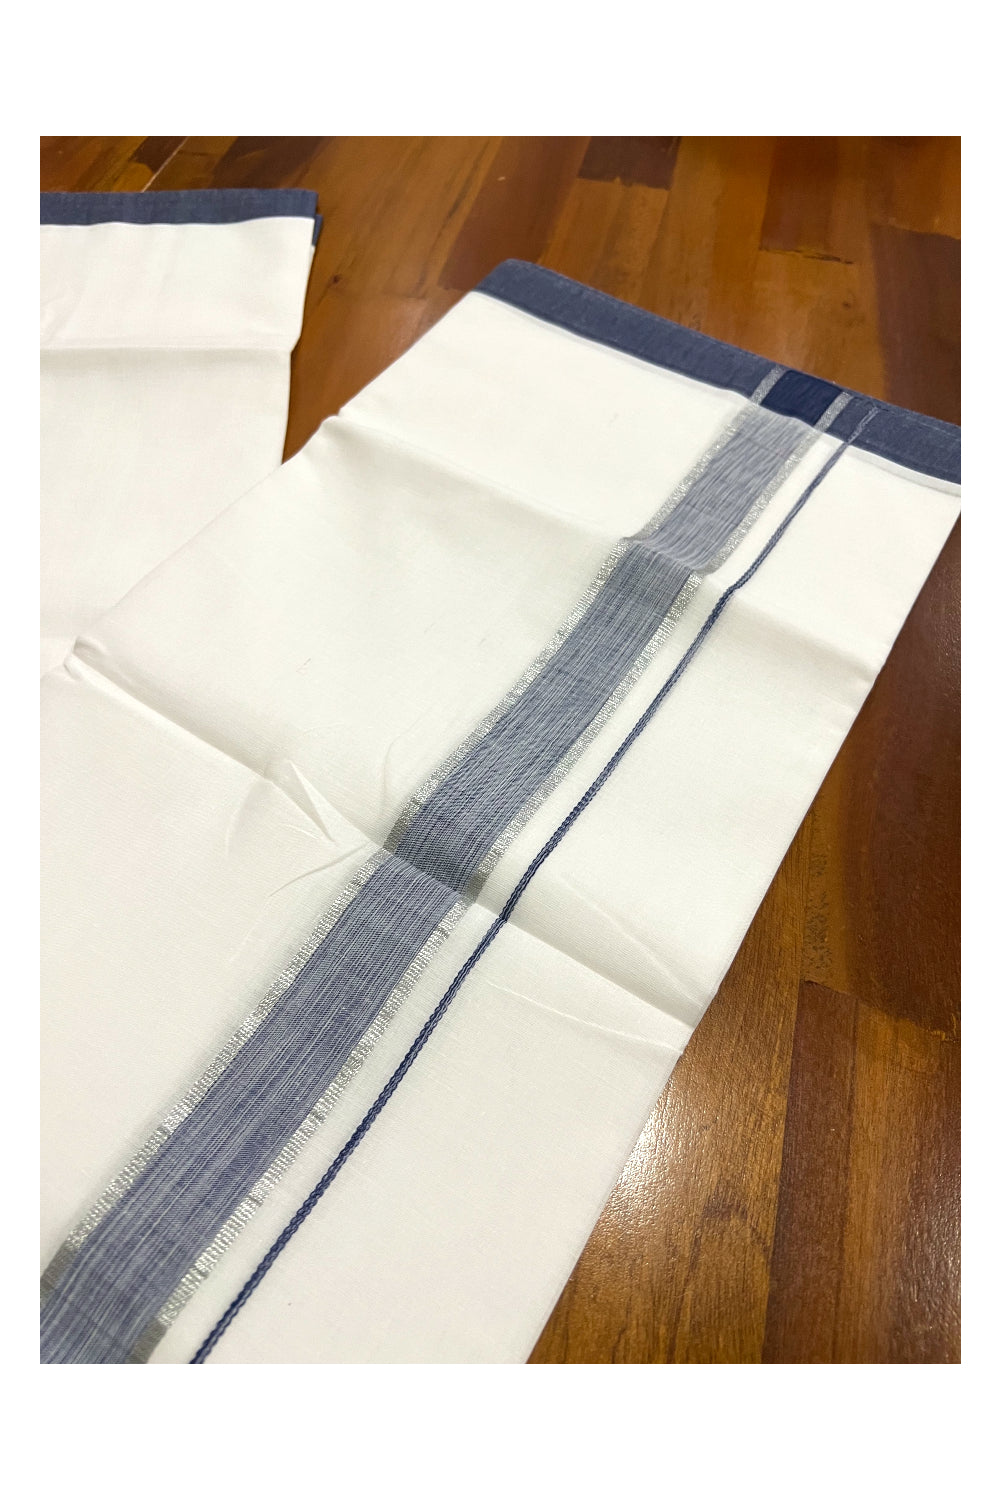 Pure White Cotton Double Mundu with Dark Blue and Silver Kasavu Border (South Indian Dhoti)